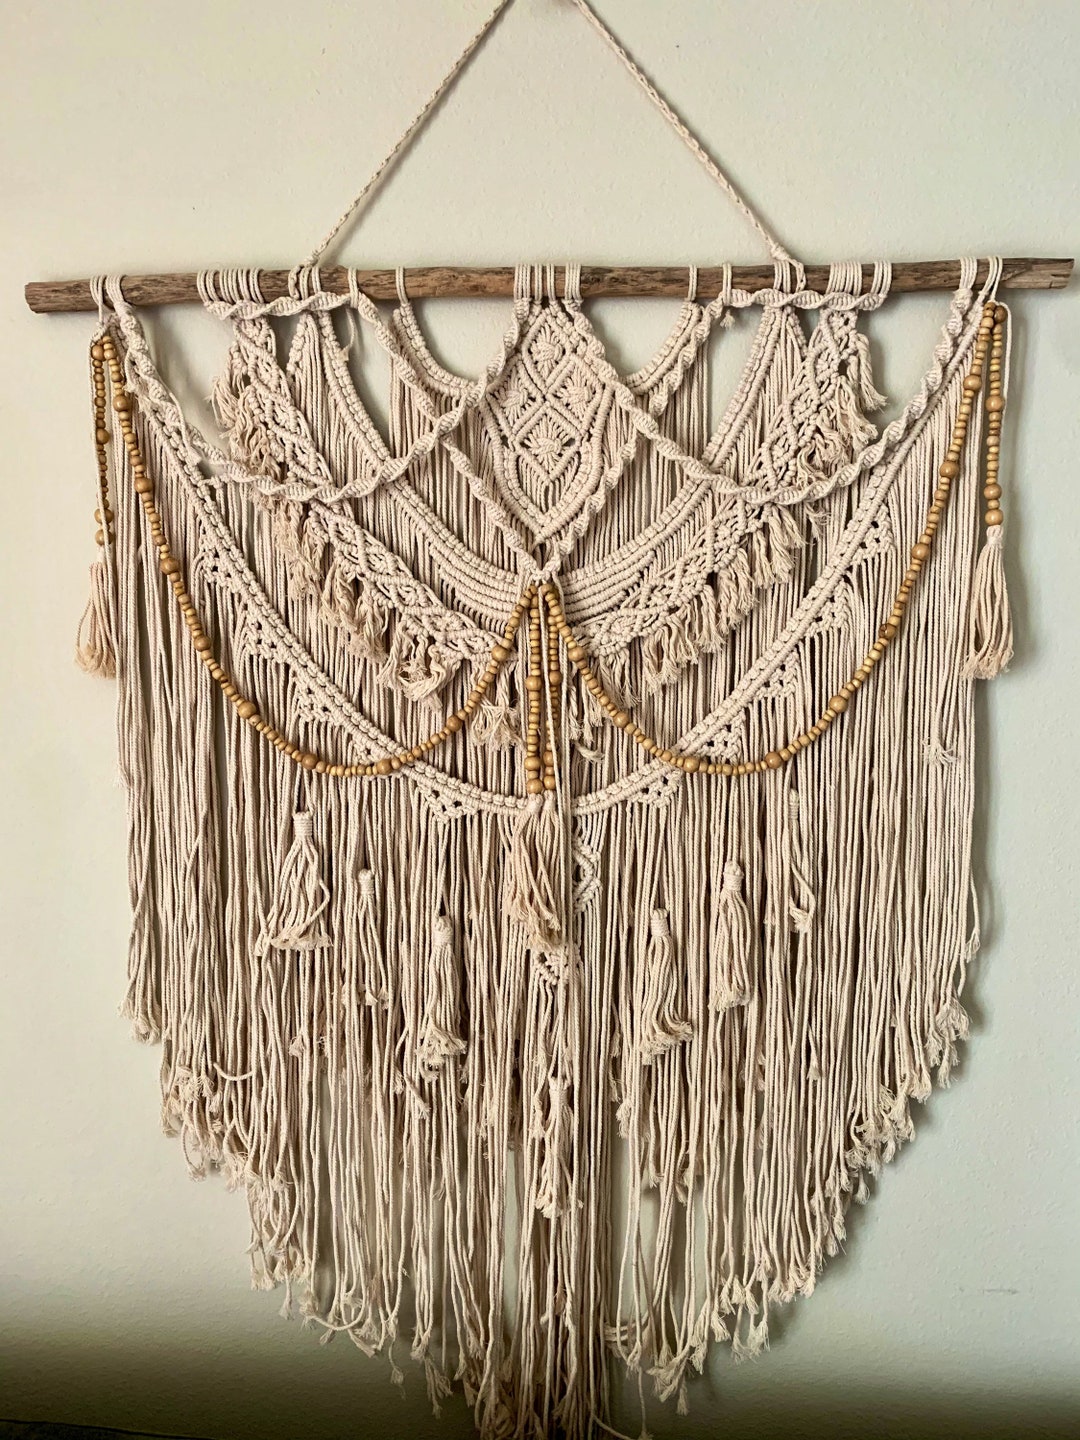 Handcrafted Macrame Wall Hanging/ With Beads/ Handmade in Bali - Etsy